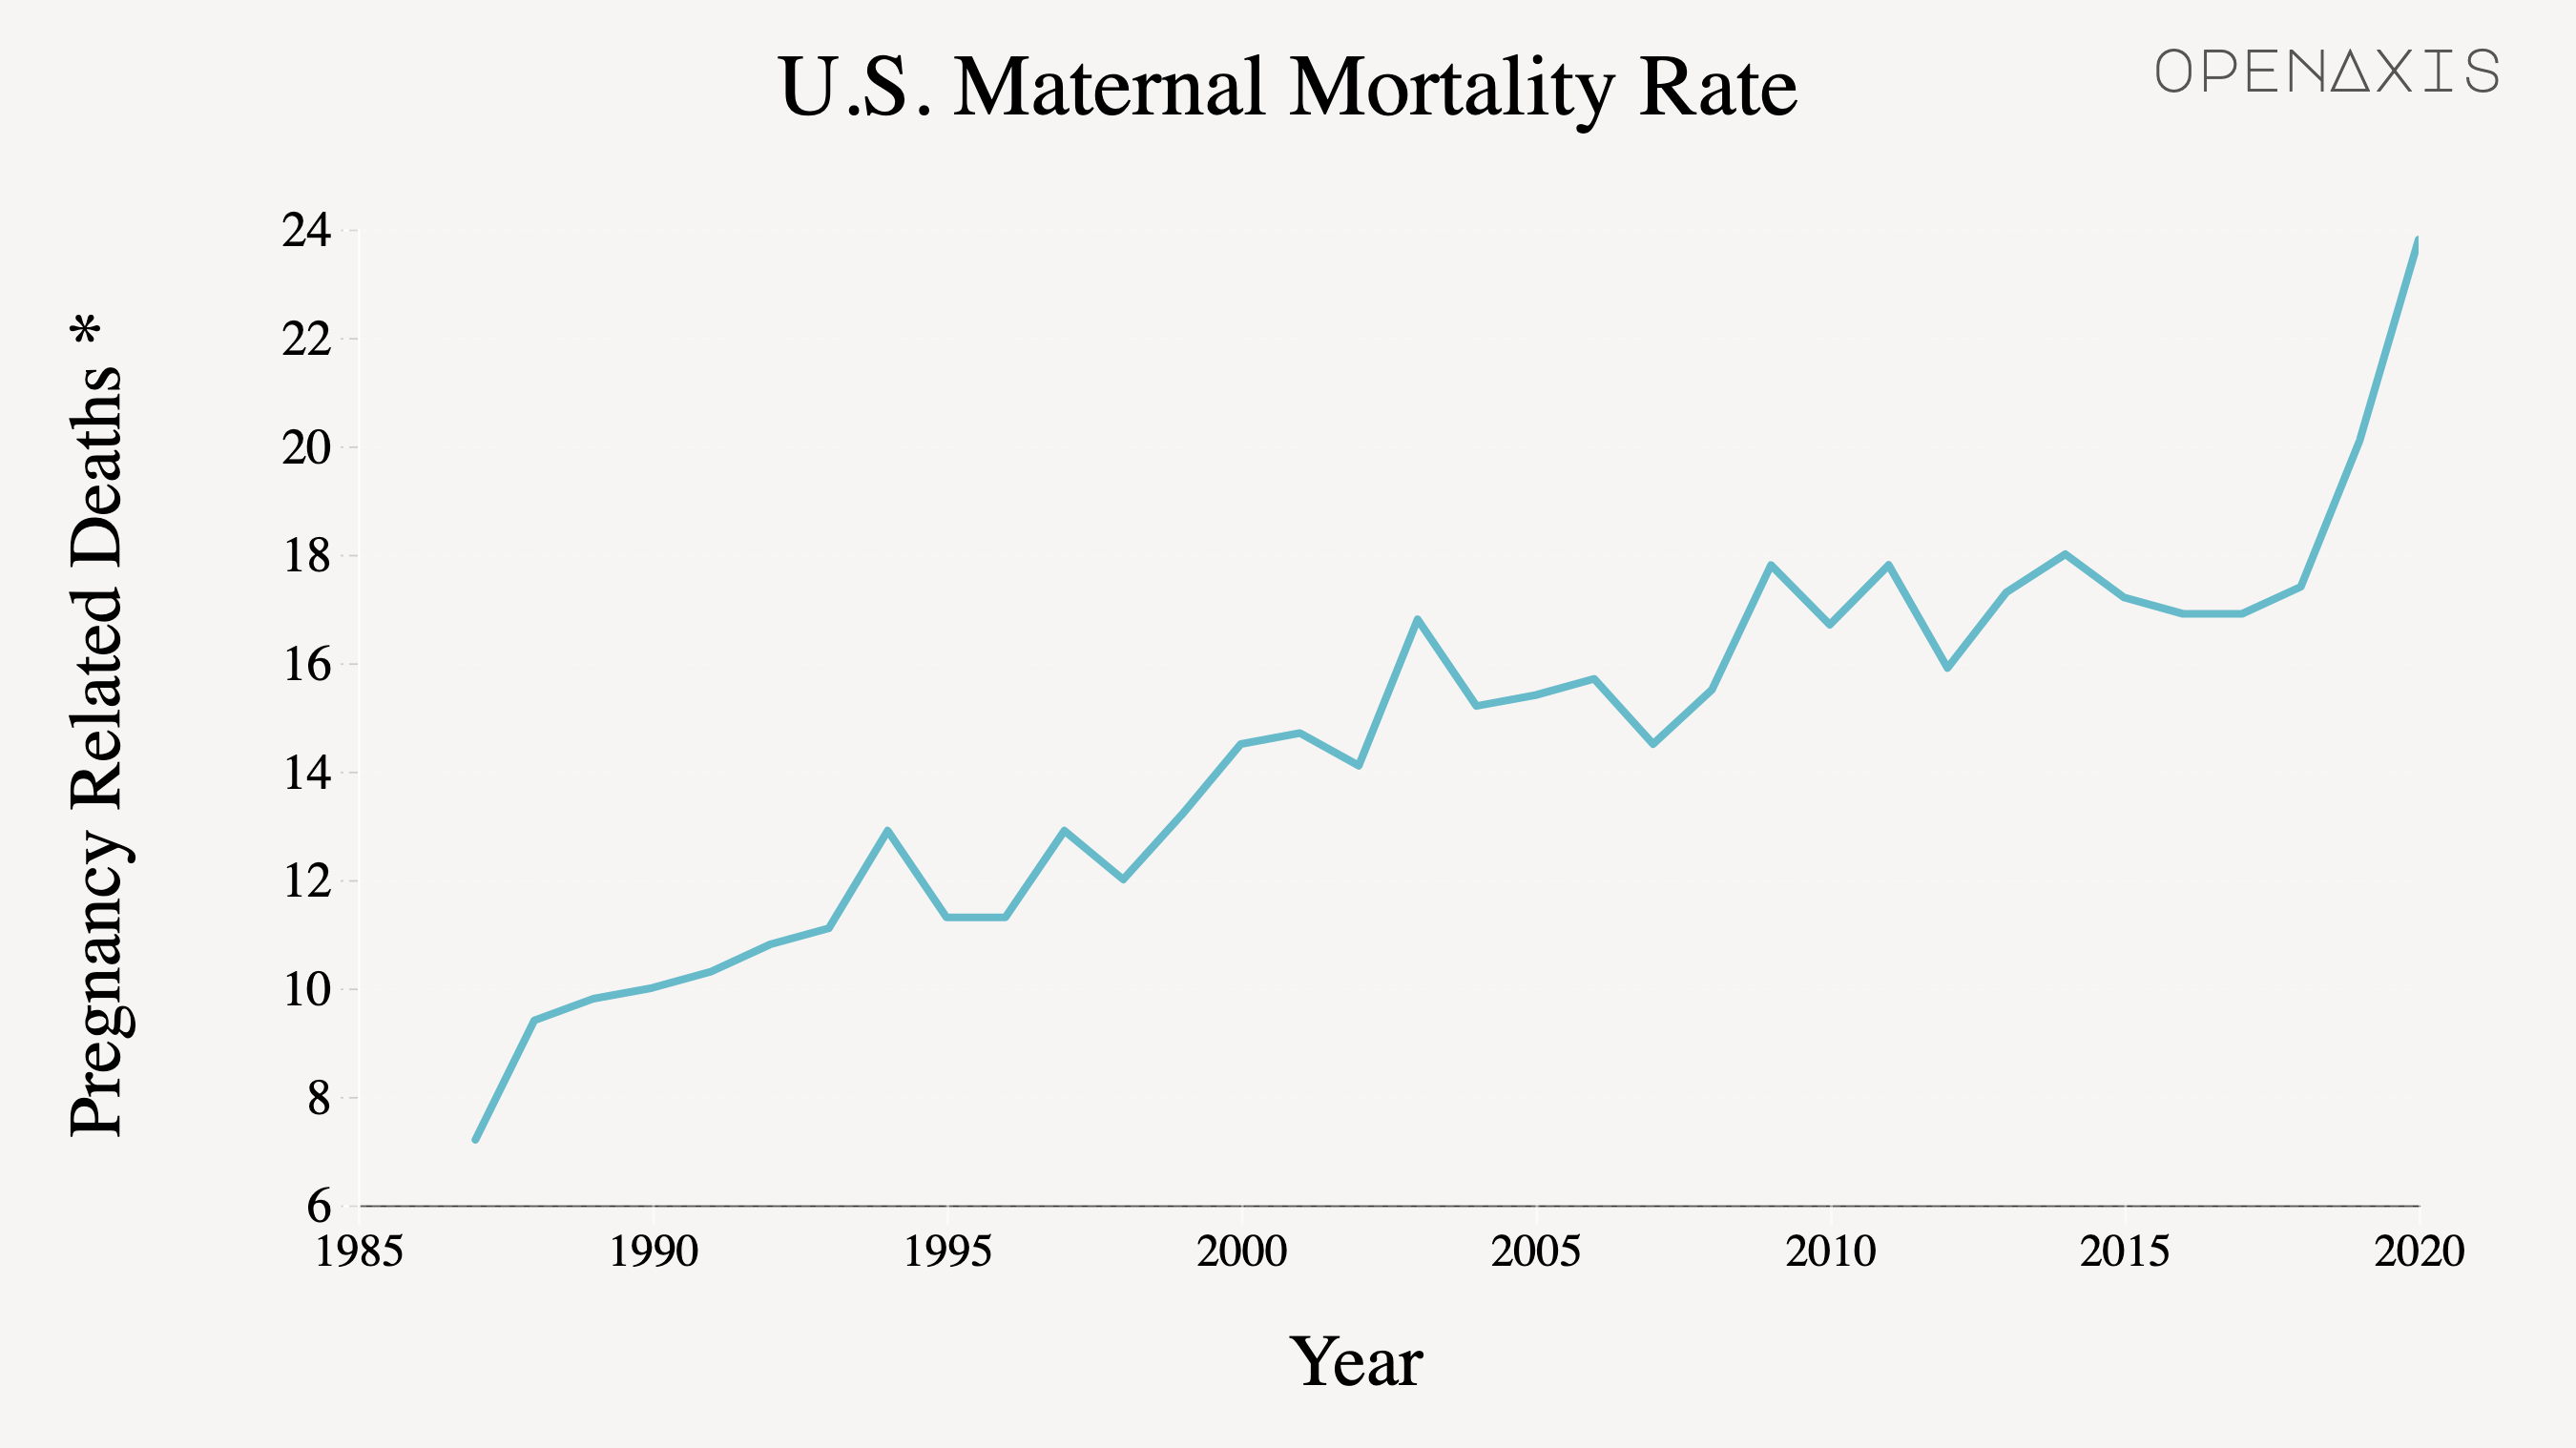 <p>This data was collected from the CDC's Pregnancy Mortality Surveillance System. Since the system has been put in place reported pregnancy related deaths have increased from 7.2 deaths per 100,000 live births in 1987 to <a href="https://www.cdc.gov/nchs/data/hestat/maternal-mortality/2020/maternal-mortality-rates-2020.htm#anchor_1559670094897" target="_blank">23.8 deaths</a> per 100,000s live births in 2020. According to the CDC, "the reasons for the overall increase in pregnancy-related mortality are unclear." However, to improve the underreporting of maternal mortality it was recommended to add a "<a href="https://www.cdc.gov/nchs/maternal-mortality/evaluation.htm" target="_blank">pregnancy related death box</a>" to death certificates. This might explain some of the increase over time, however it does not explain all of it. *Note: Mortality rates are per 100,000 live births</p><p><br /></p><p>More info can be found <a href="https://www.cdc.gov/reproductivehealth/maternal-mortality/pregnancy-mortality-surveillance-system.htm" target="_blank">here</a>.</p><p><br /></p><p>Related Information:  </p><ul><li><a href="https://app.openaxis.com/visualizations/3234" target="_blank">Disparity between different race/ethnicity backgrounds</a></li><li>U.S. Maternal Mortality Rate compared to other developed countries</li></ul><p><br /></p><p>﻿<a href="/search?q=%23reproductivehealth" target="_blank"><span data-index="0" data-denotation-char data-id="0" data-value="&lt;a href=&quot;/search?q=%23reproductivehealth&quot; target=_self&gt;#reproductivehealth" data-link="/search?q=%23reproductivehealth">﻿<span contenteditable="false"><span></span><a href="/search?q=%23reproductivehealth" target="_self">#reproductivehealth</a></span>﻿</span> </a></p><p><br /></p><p>Source: Center for Disease Control (CDC)</p>